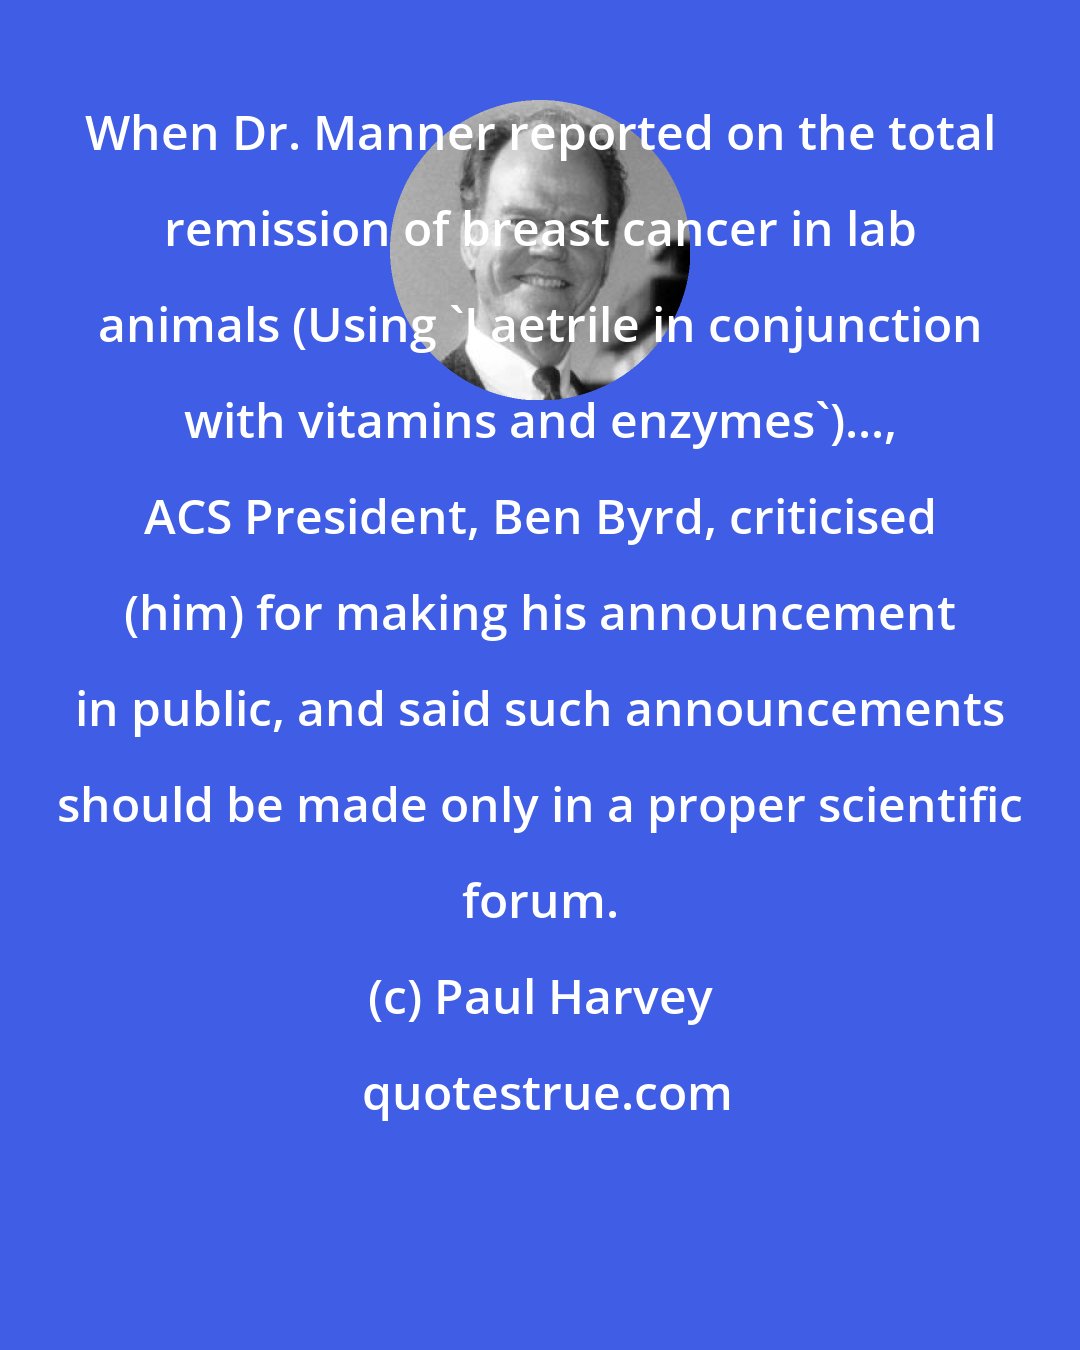 Paul Harvey: When Dr. Manner reported on the total remission of breast cancer in lab animals (Using 'Laetrile in conjunction with vitamins and enzymes')..., ACS President, Ben Byrd, criticised (him) for making his announcement in public, and said such announcements should be made only in a proper scientific forum.